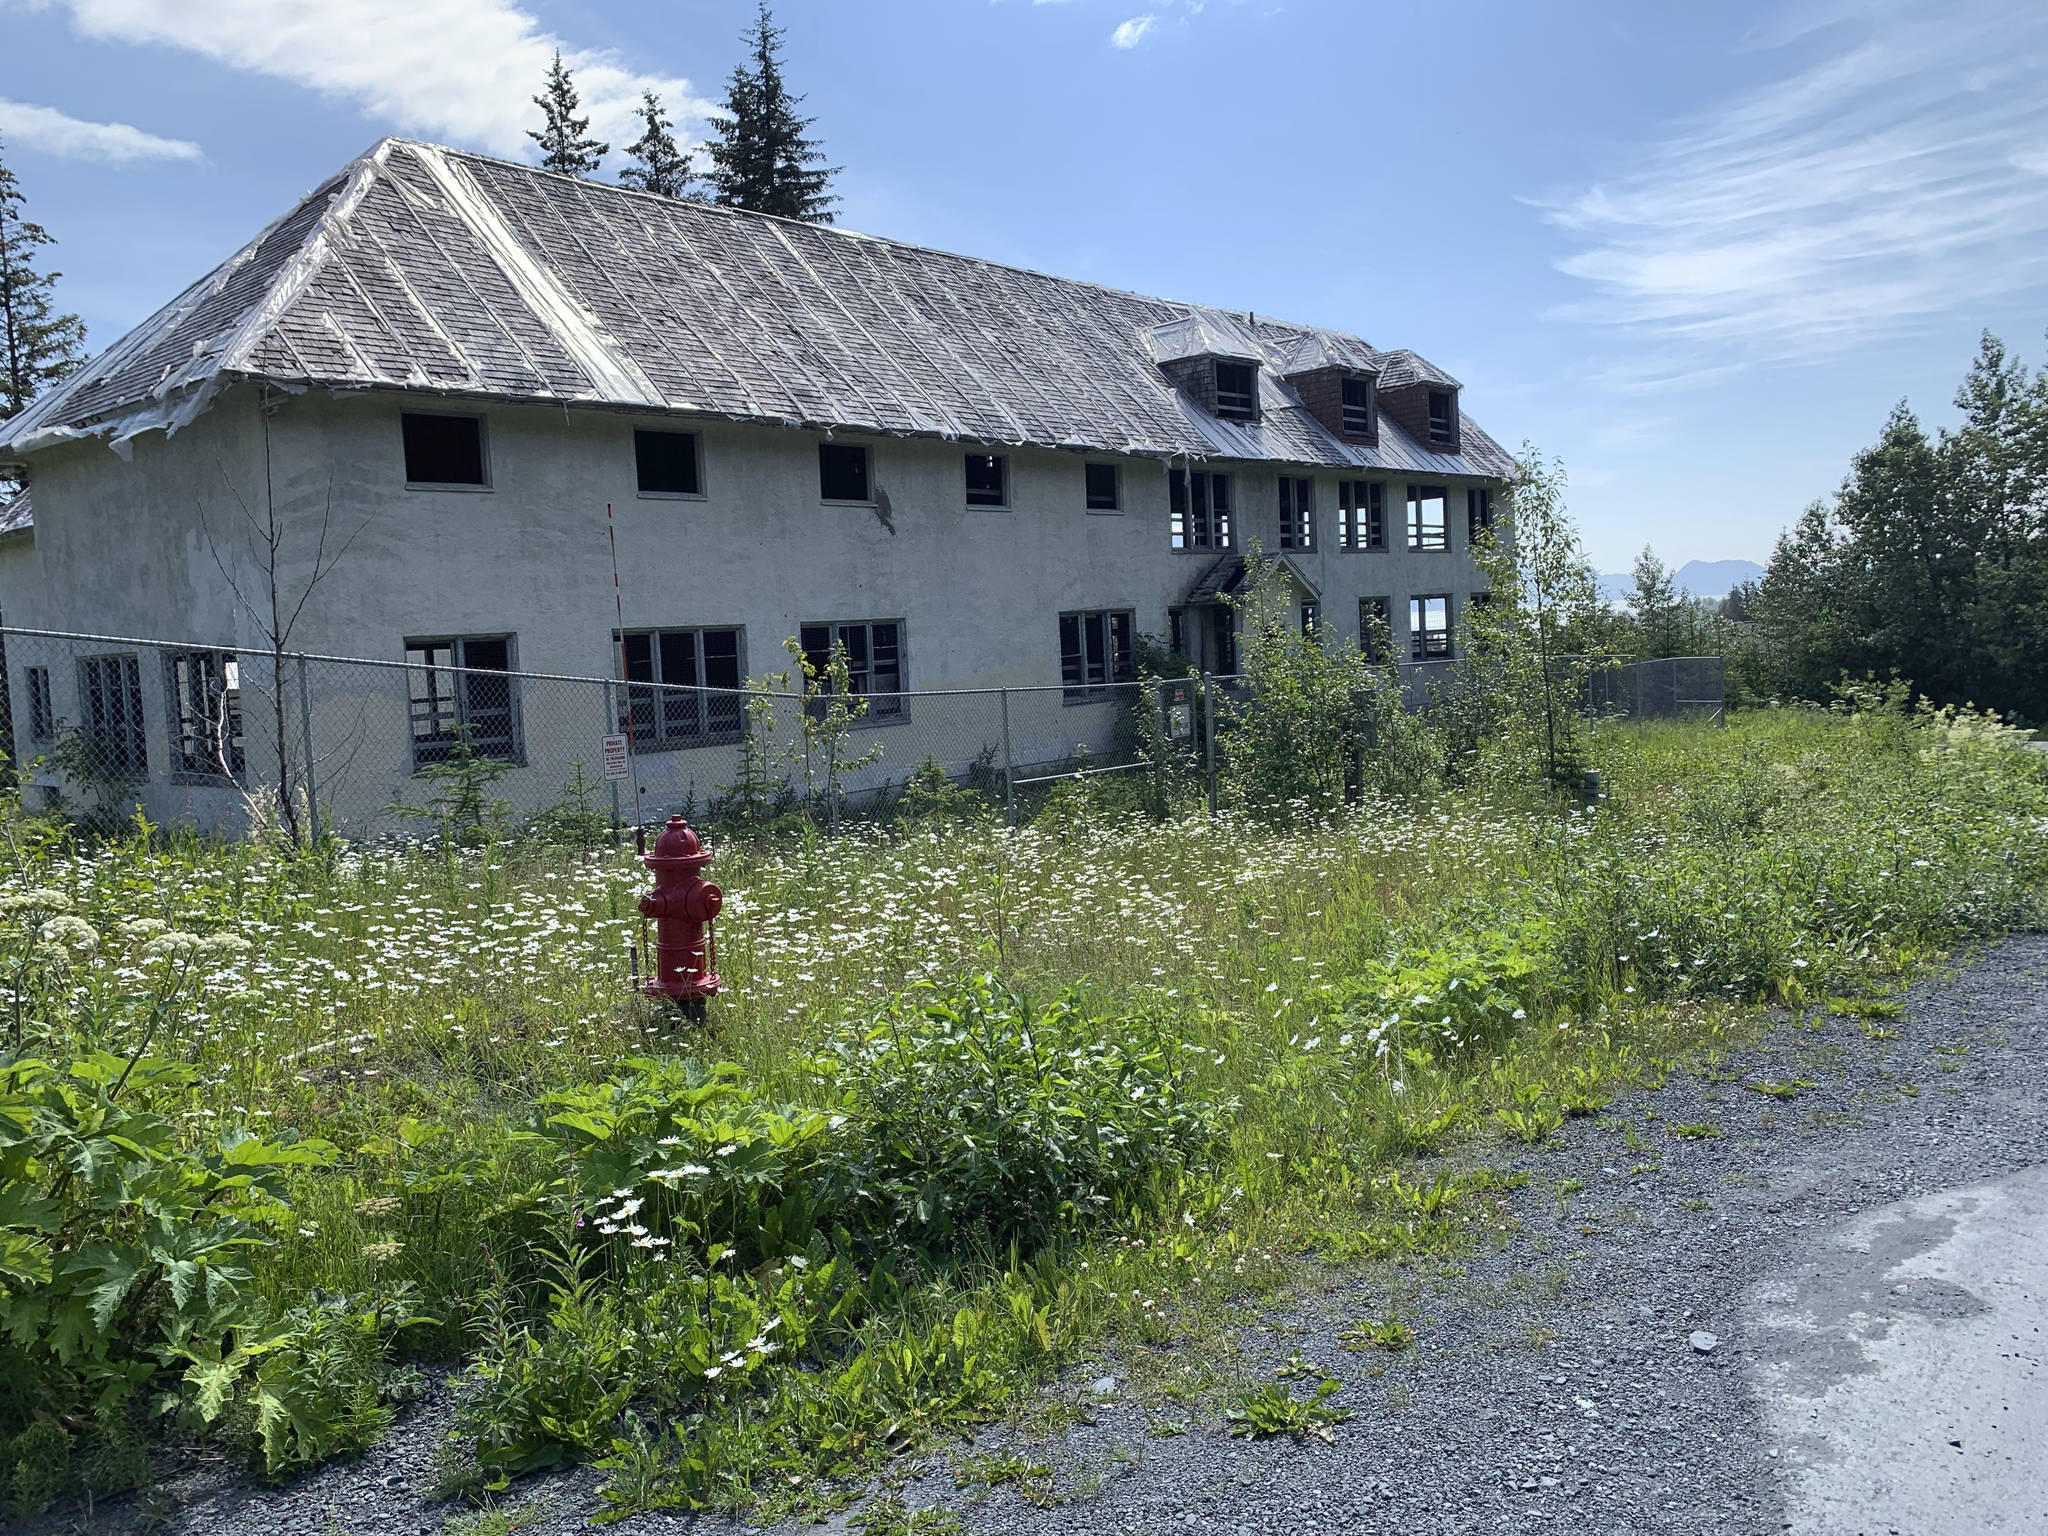 This undated photo shows a building that remains at the site of the Jesse Lee Home in Seward, Alaska, where the territorial flag, which later became the Alaska state flag, was first flown.The neglected site where the Alaska territorial flag was designed, sewn and first flown will be demolished despite last-minute efforts by Alaskans and a preservation group to save it. The Seward City Council voted Monday, July 13, 2020, to raze the Jesse Lee Home. (Trish Neal via AP, File)